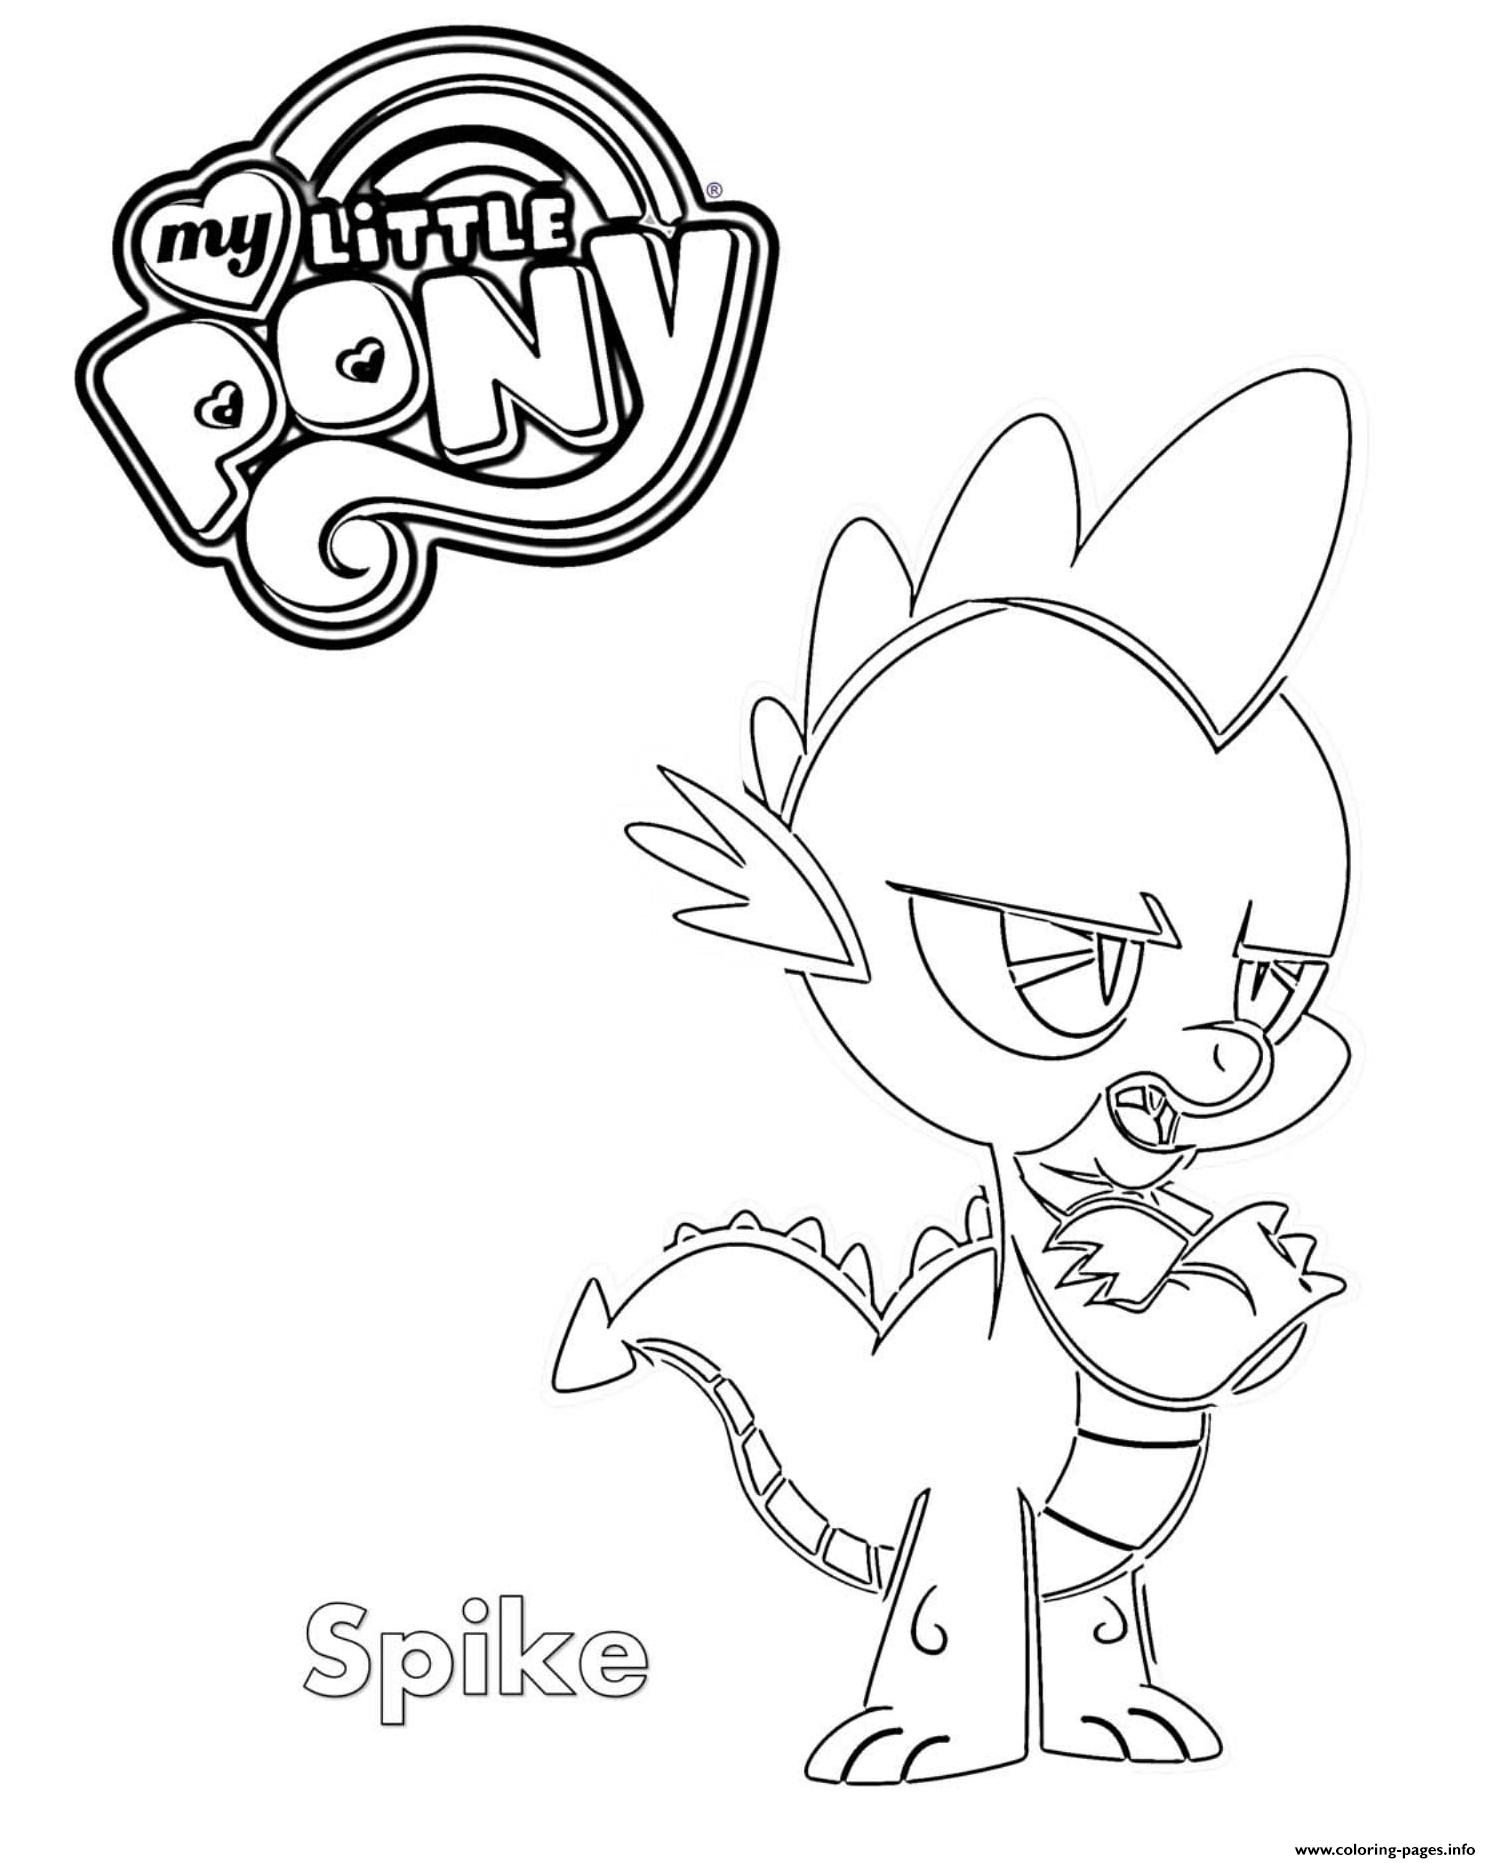 Spike My Little Pony coloring